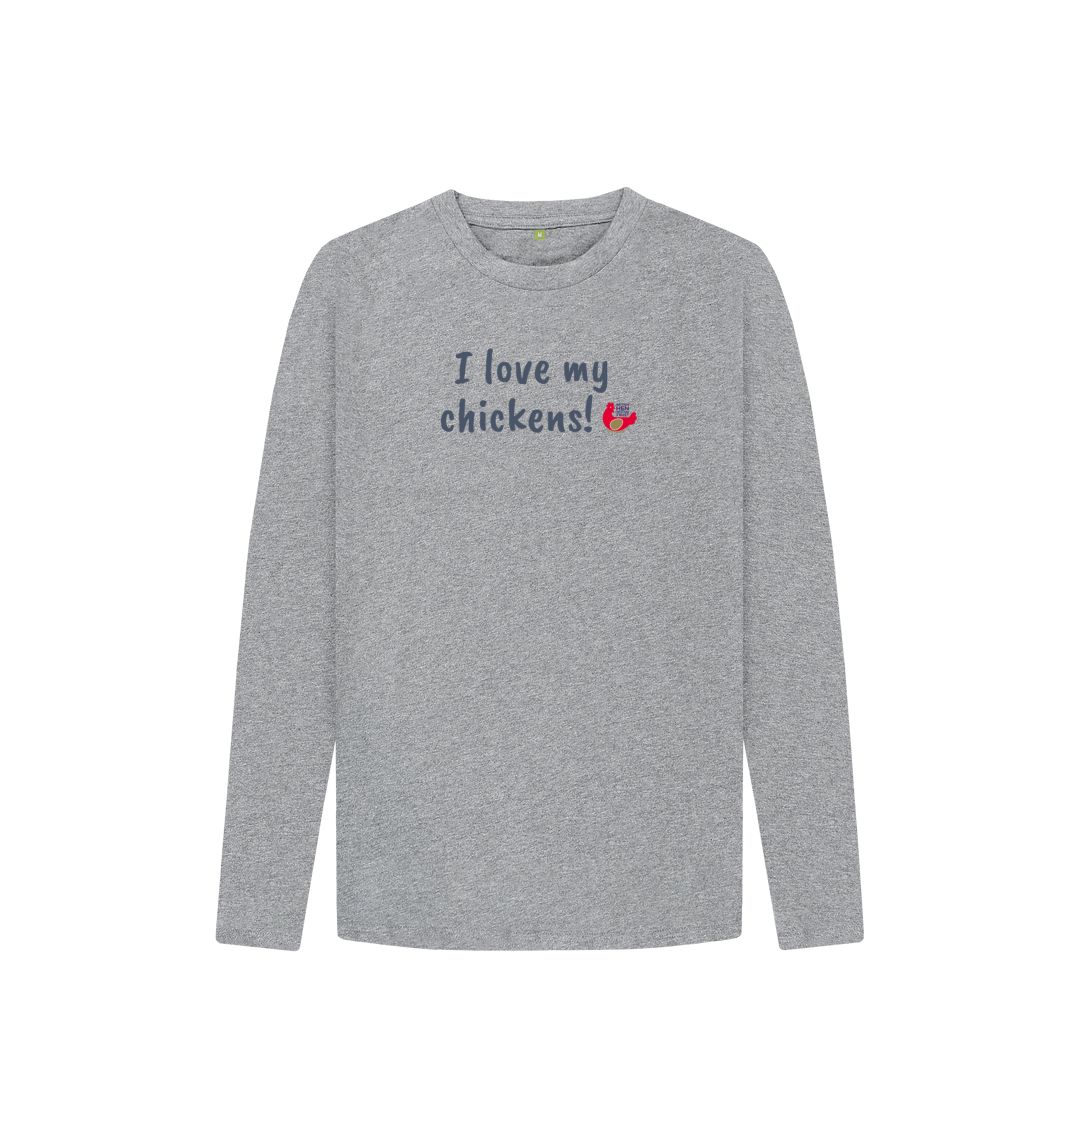 Athletic Grey I love my chickens! Kids Unisex Long Sleeve T-Shirt